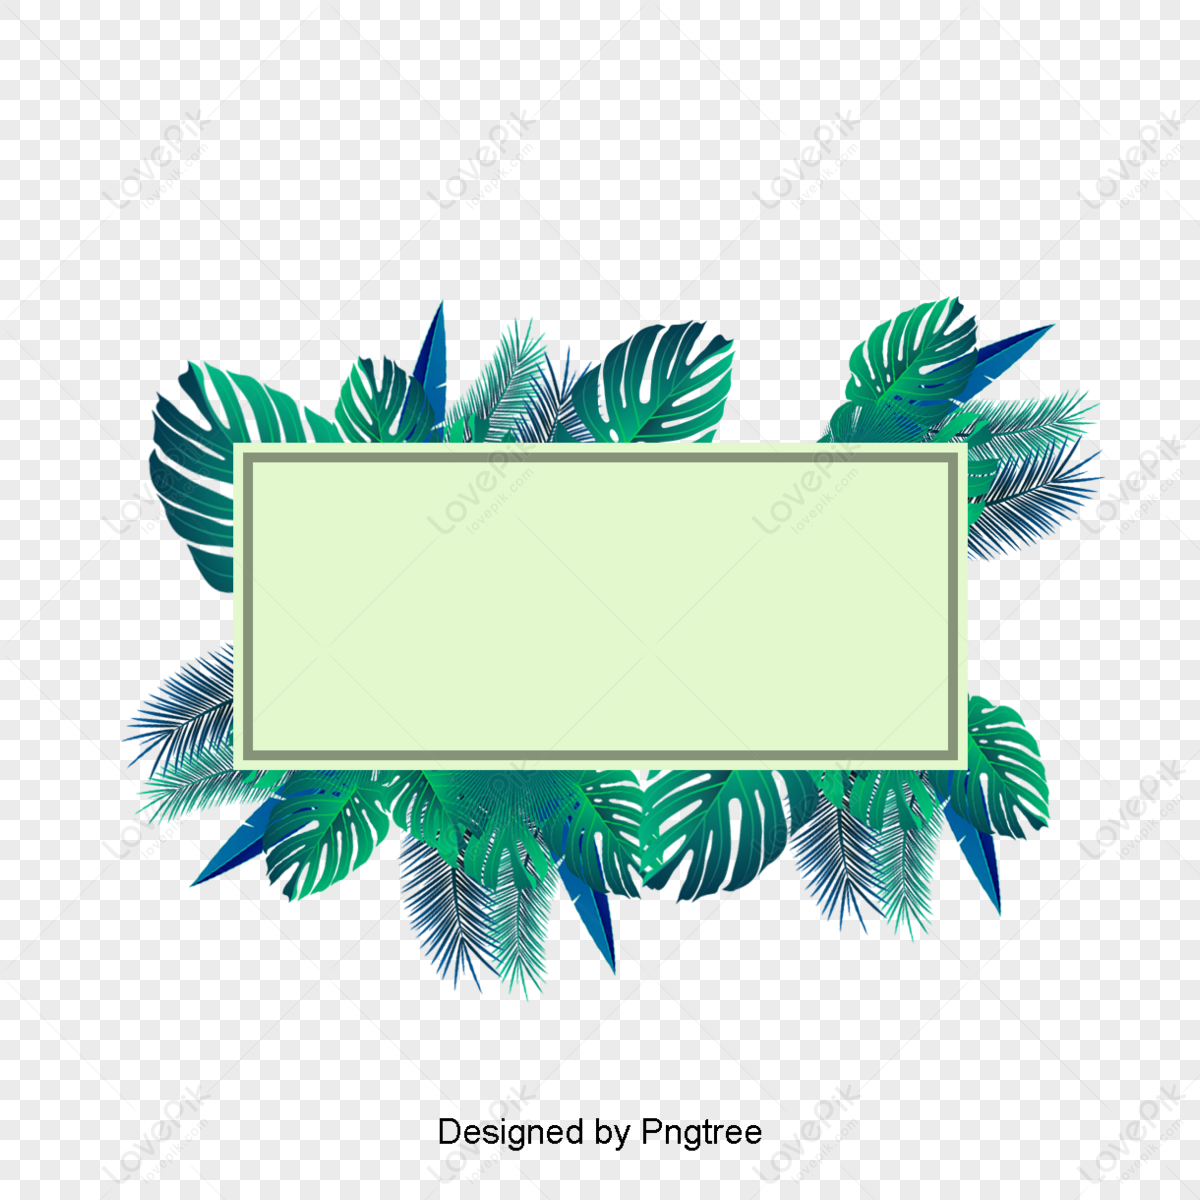 Green Tropical Leaf PNG Images With Transparent Background | Free ...